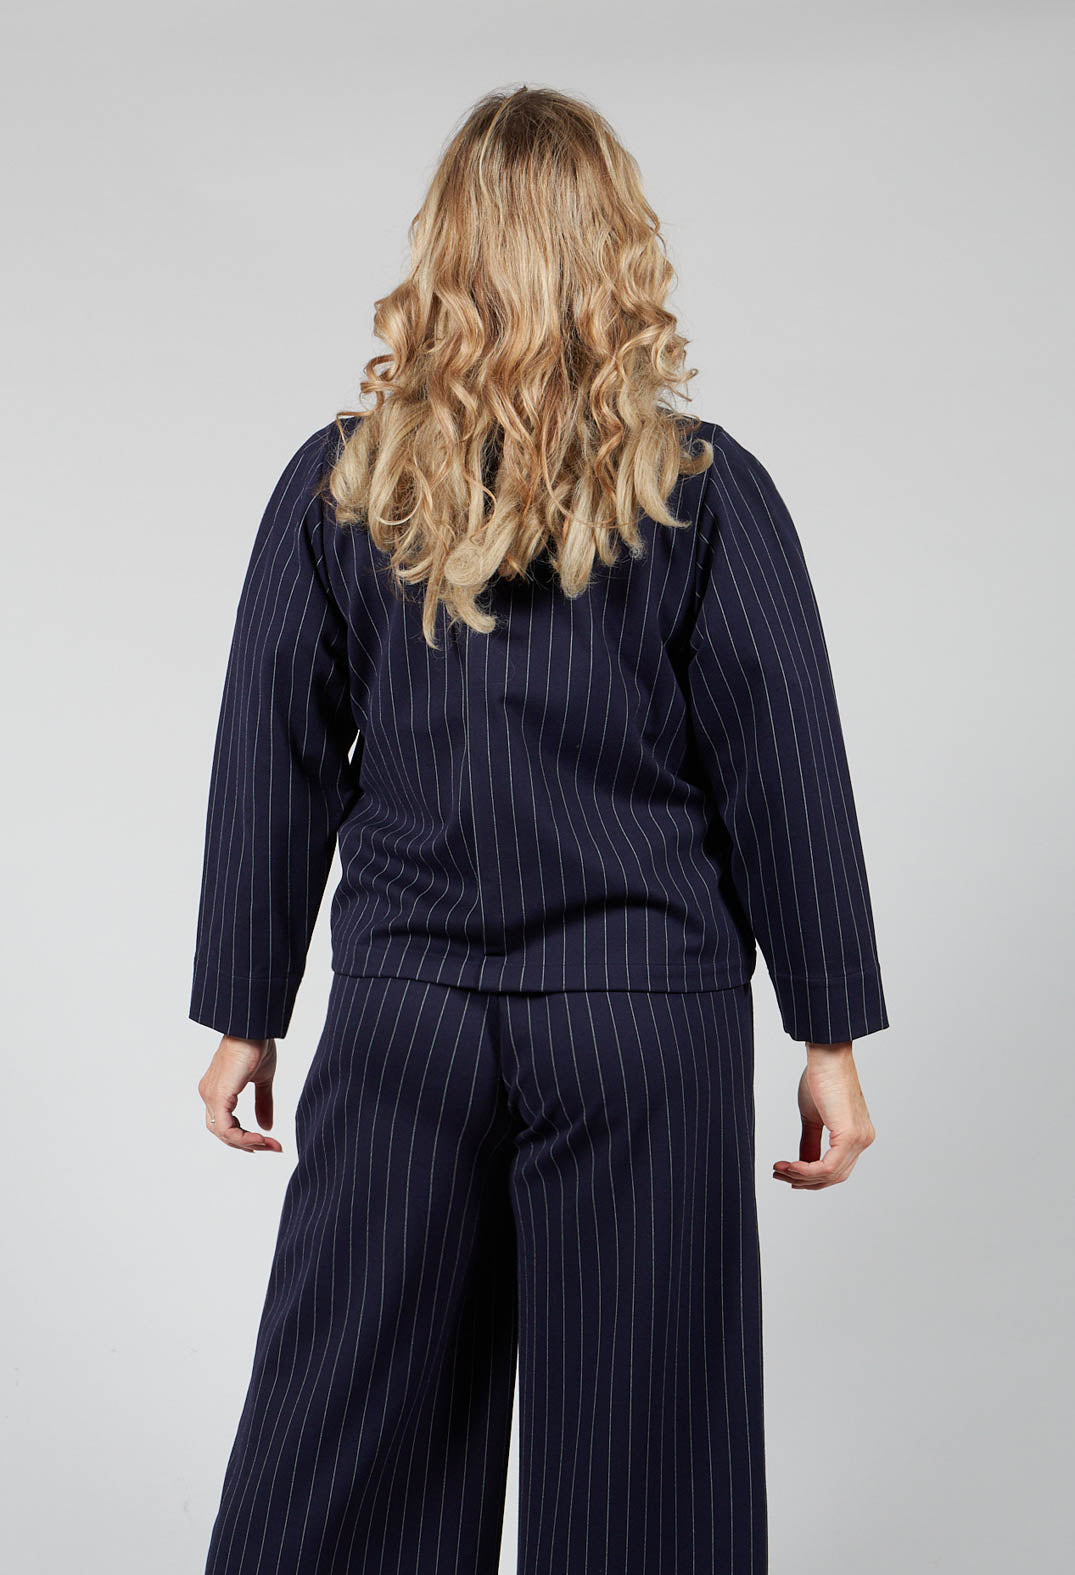 Box Shaped Top in Navy Pinstripe